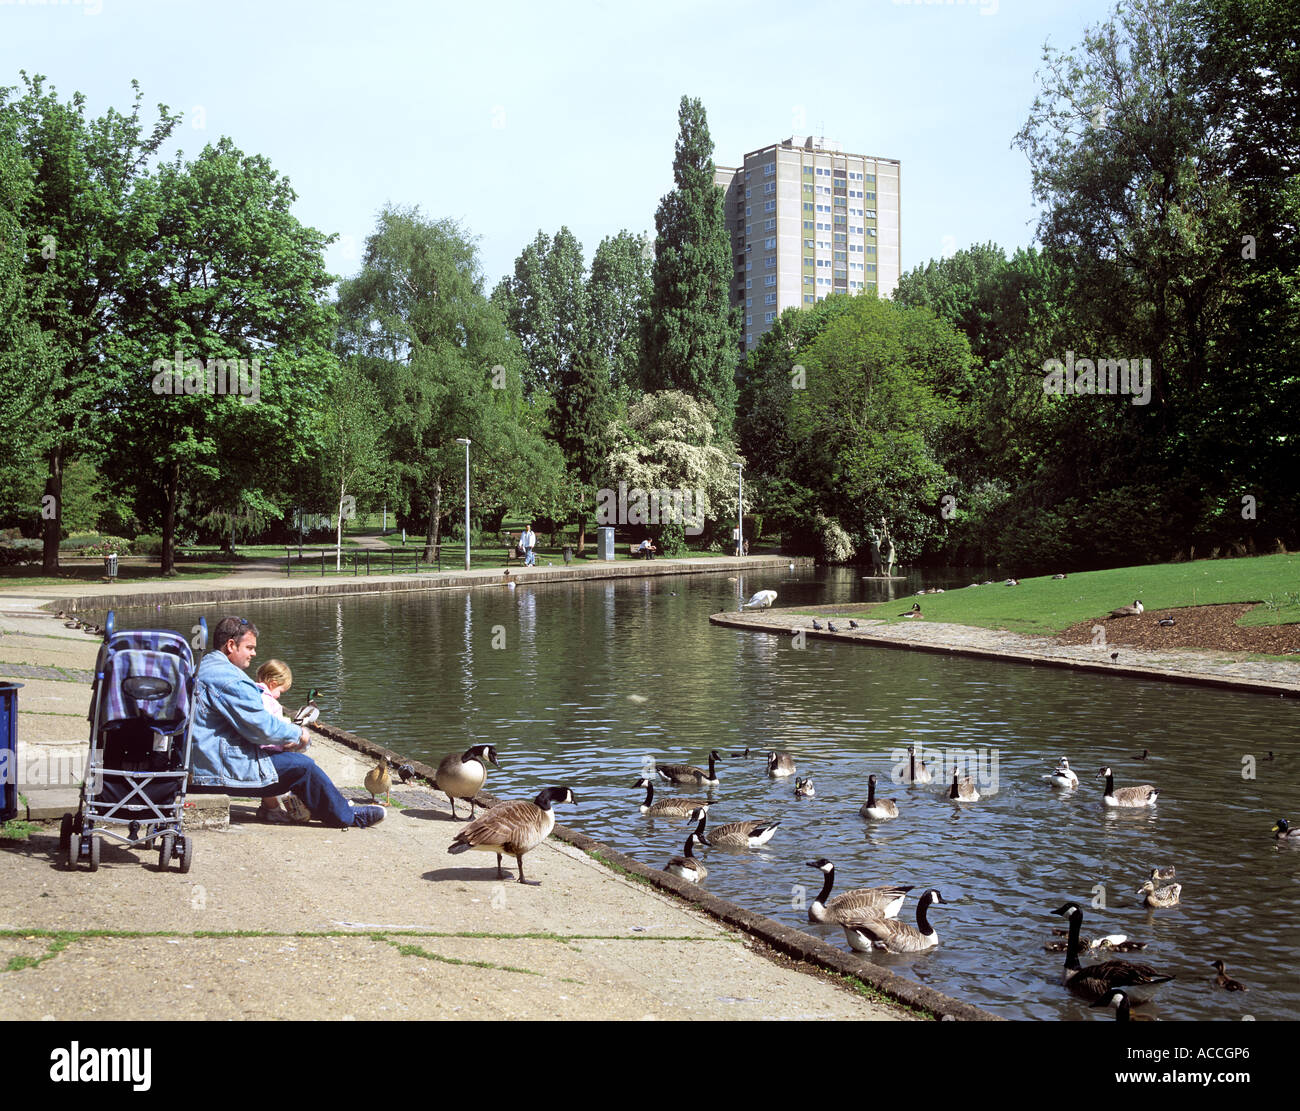 Feeding ducks and geese in the Town Centre Gardens, Stevenage New Town, Hertfordshire. Stock Photo